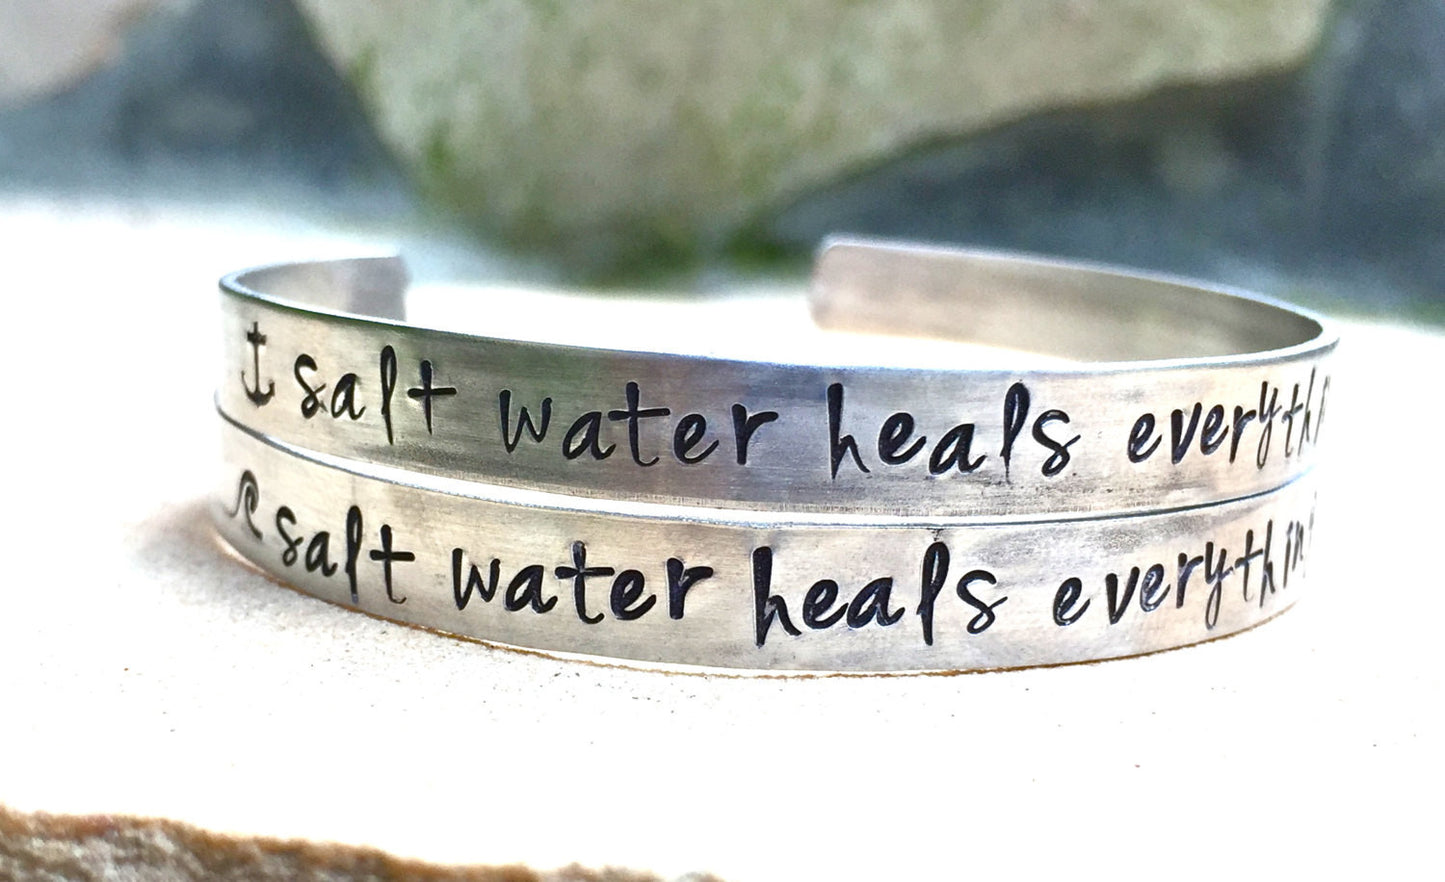 Salt Water Heals Everything Bracelet - Natashaaloha, jewelry, bracelets, necklace, keychains, fishing lures, gifts for men, charms, personalized, 